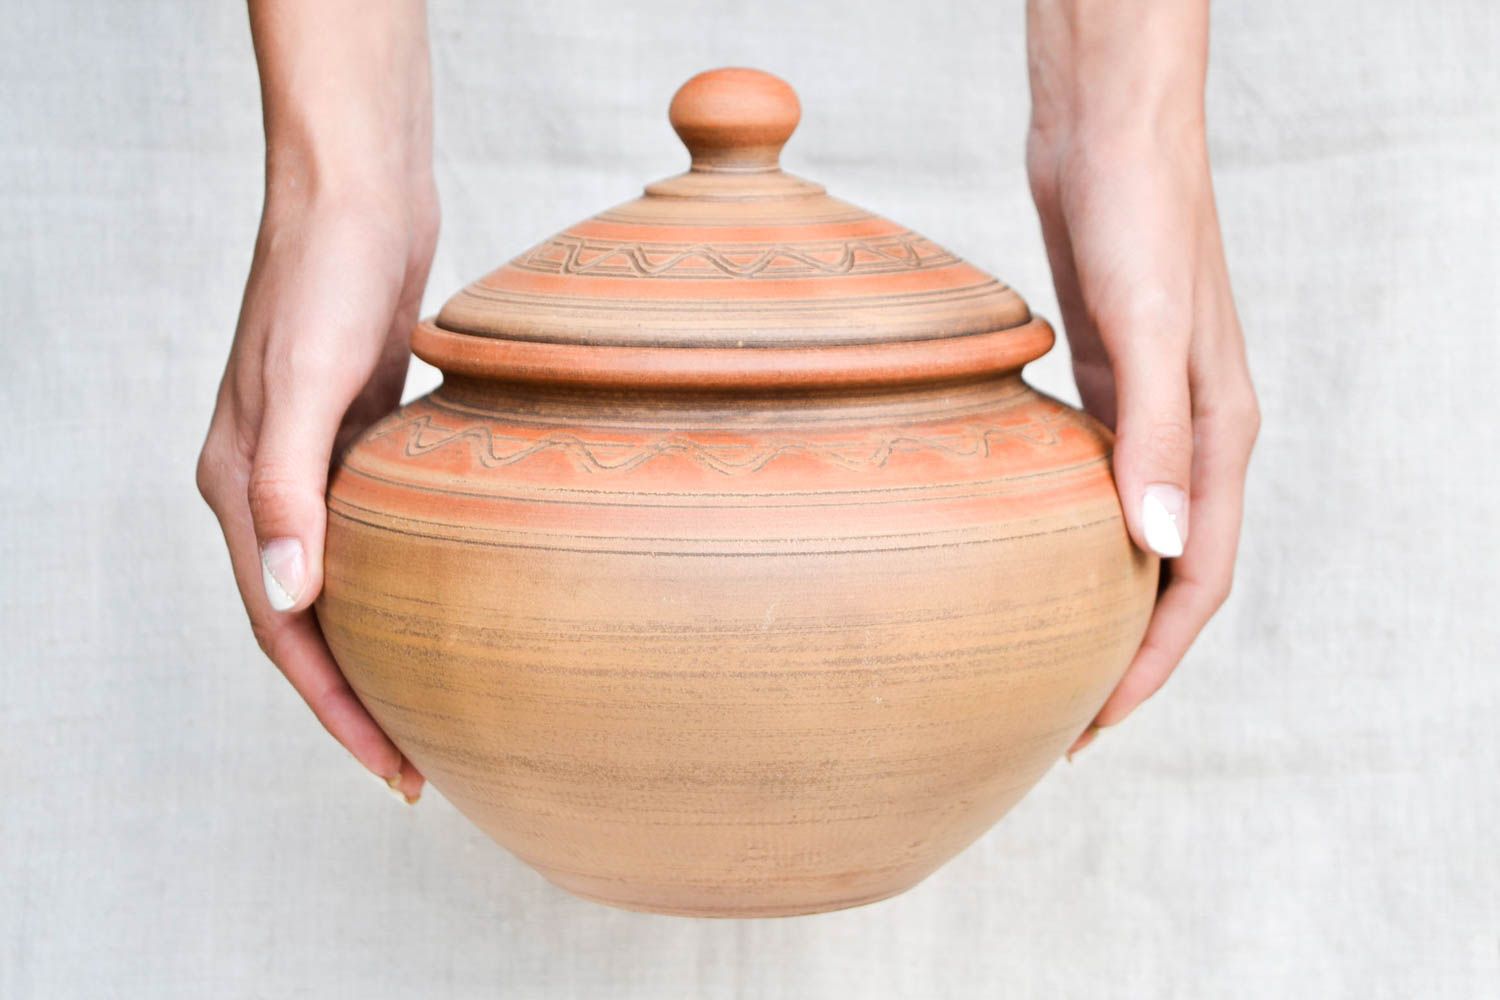 100 oz ceramic handmade baking pot with a lid in ethnic style 3,8 lb photo 2